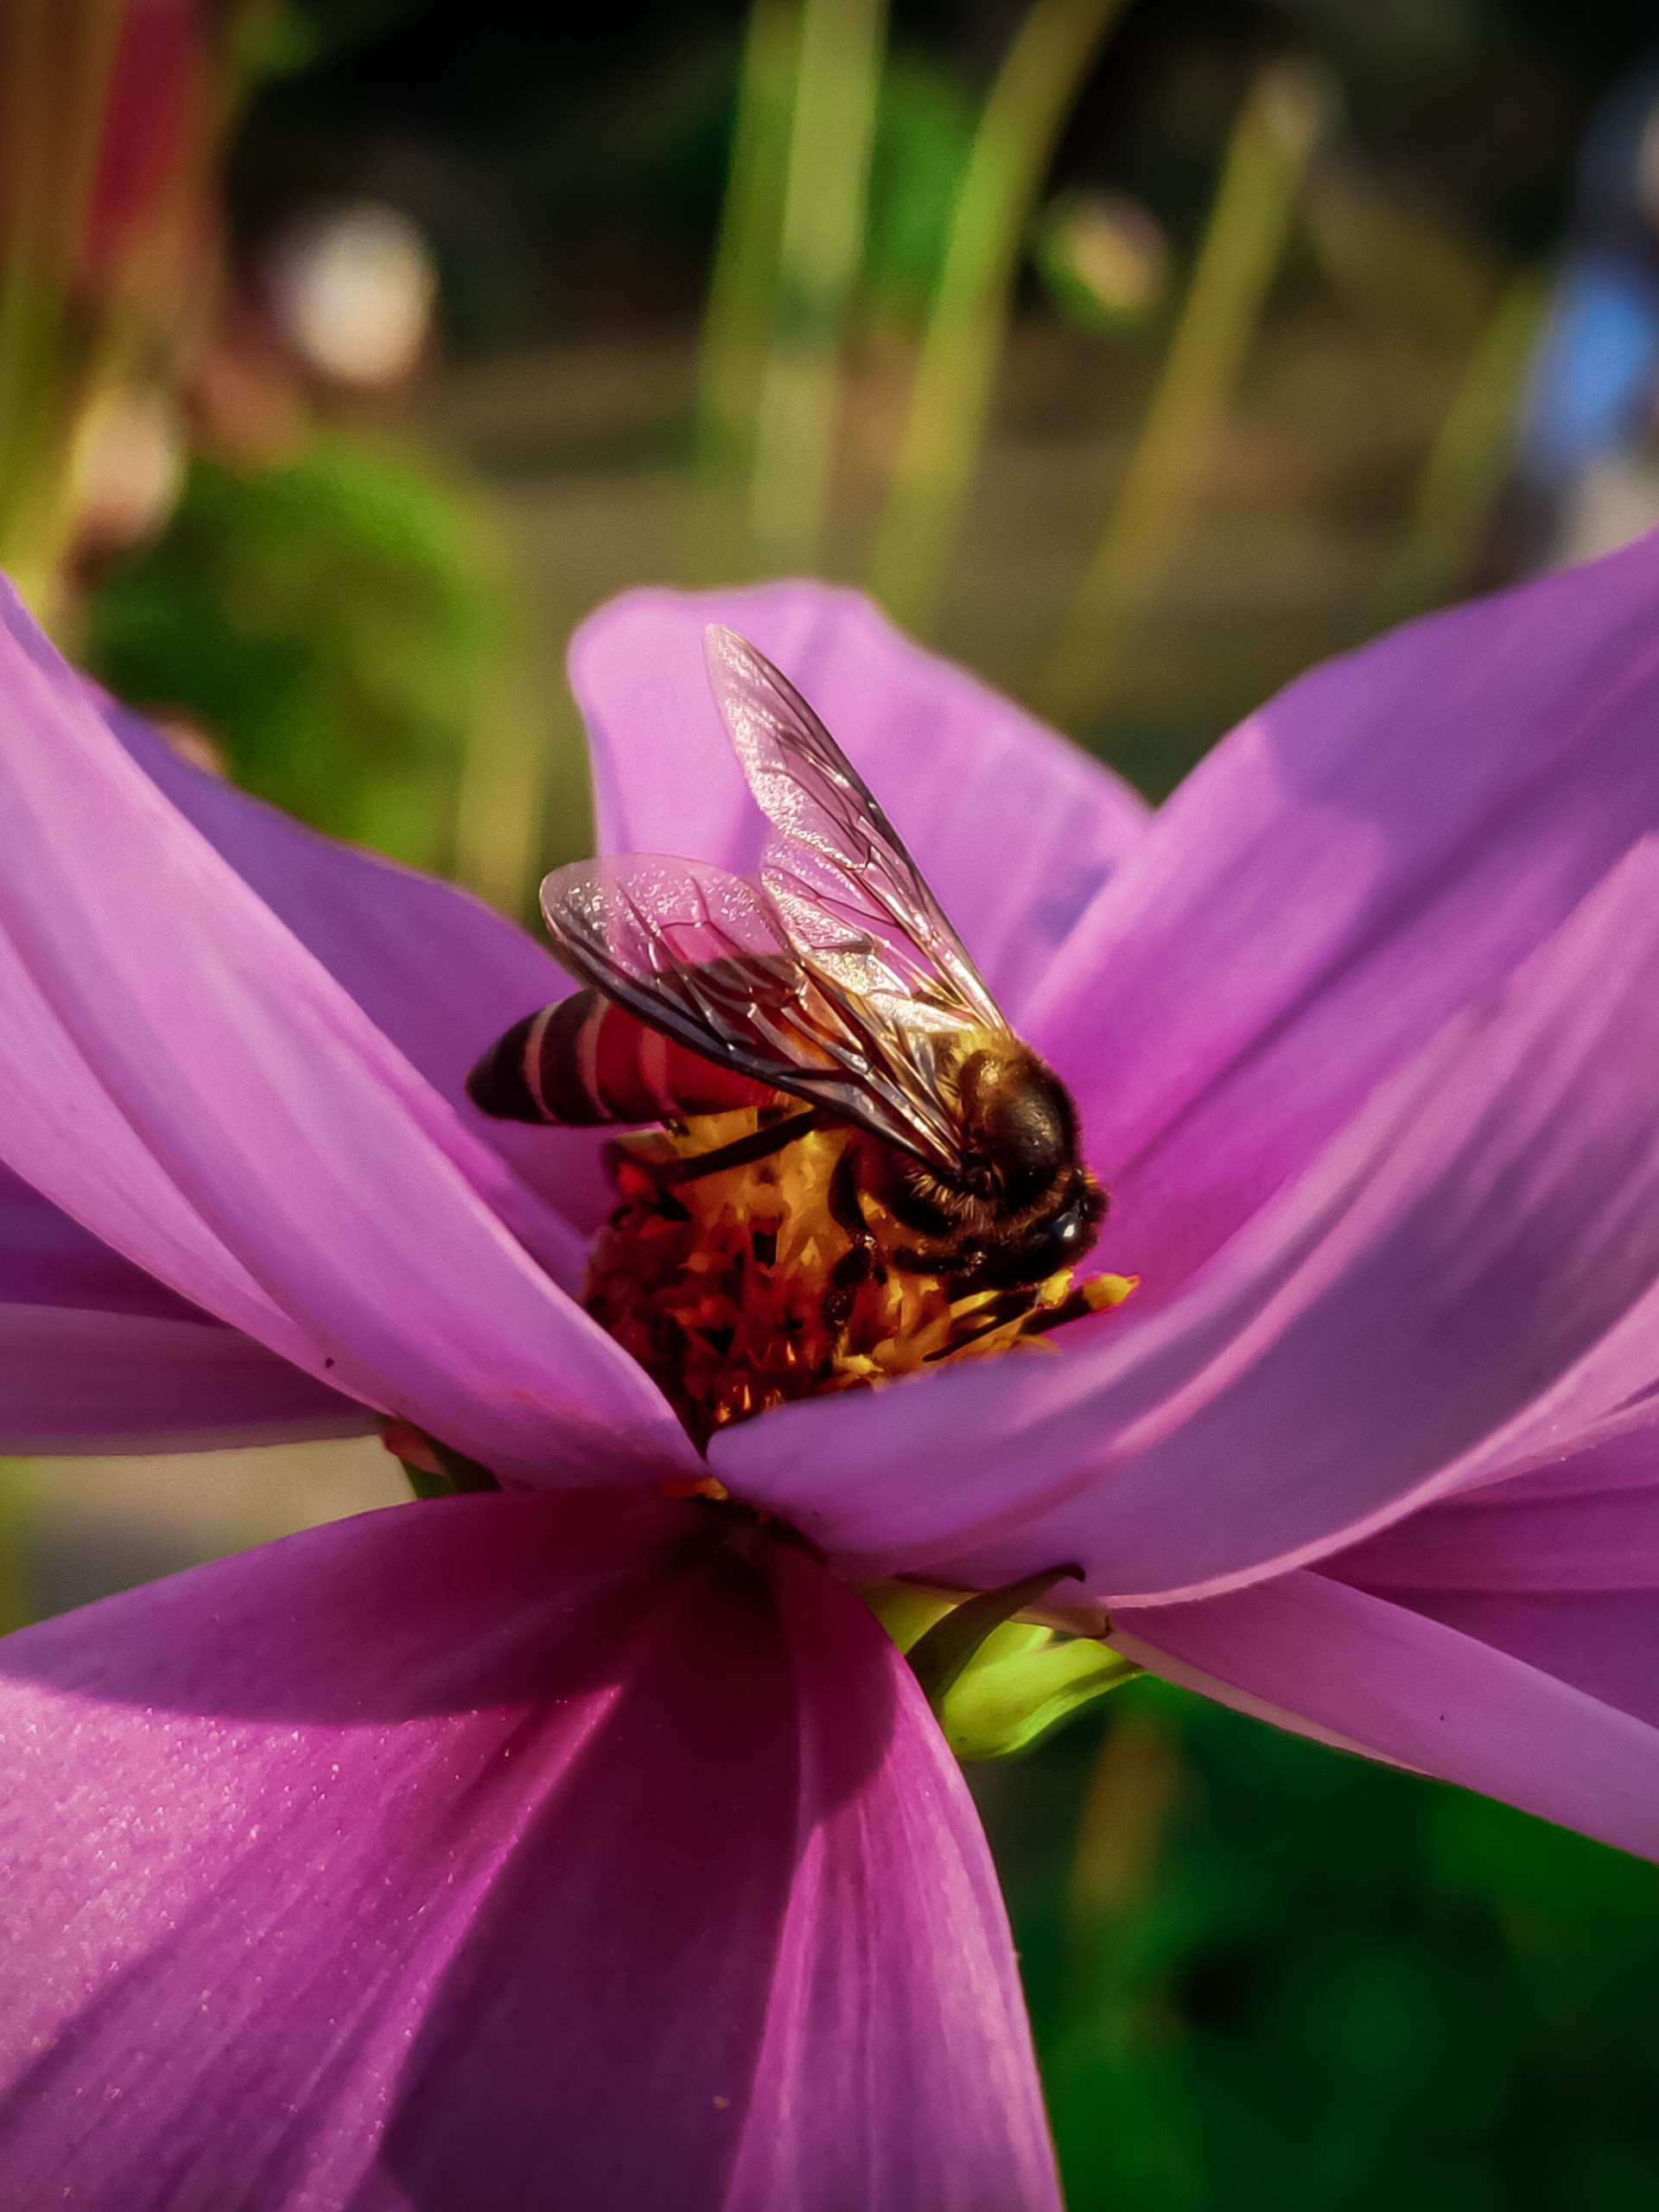 Tiny Bee in a flower